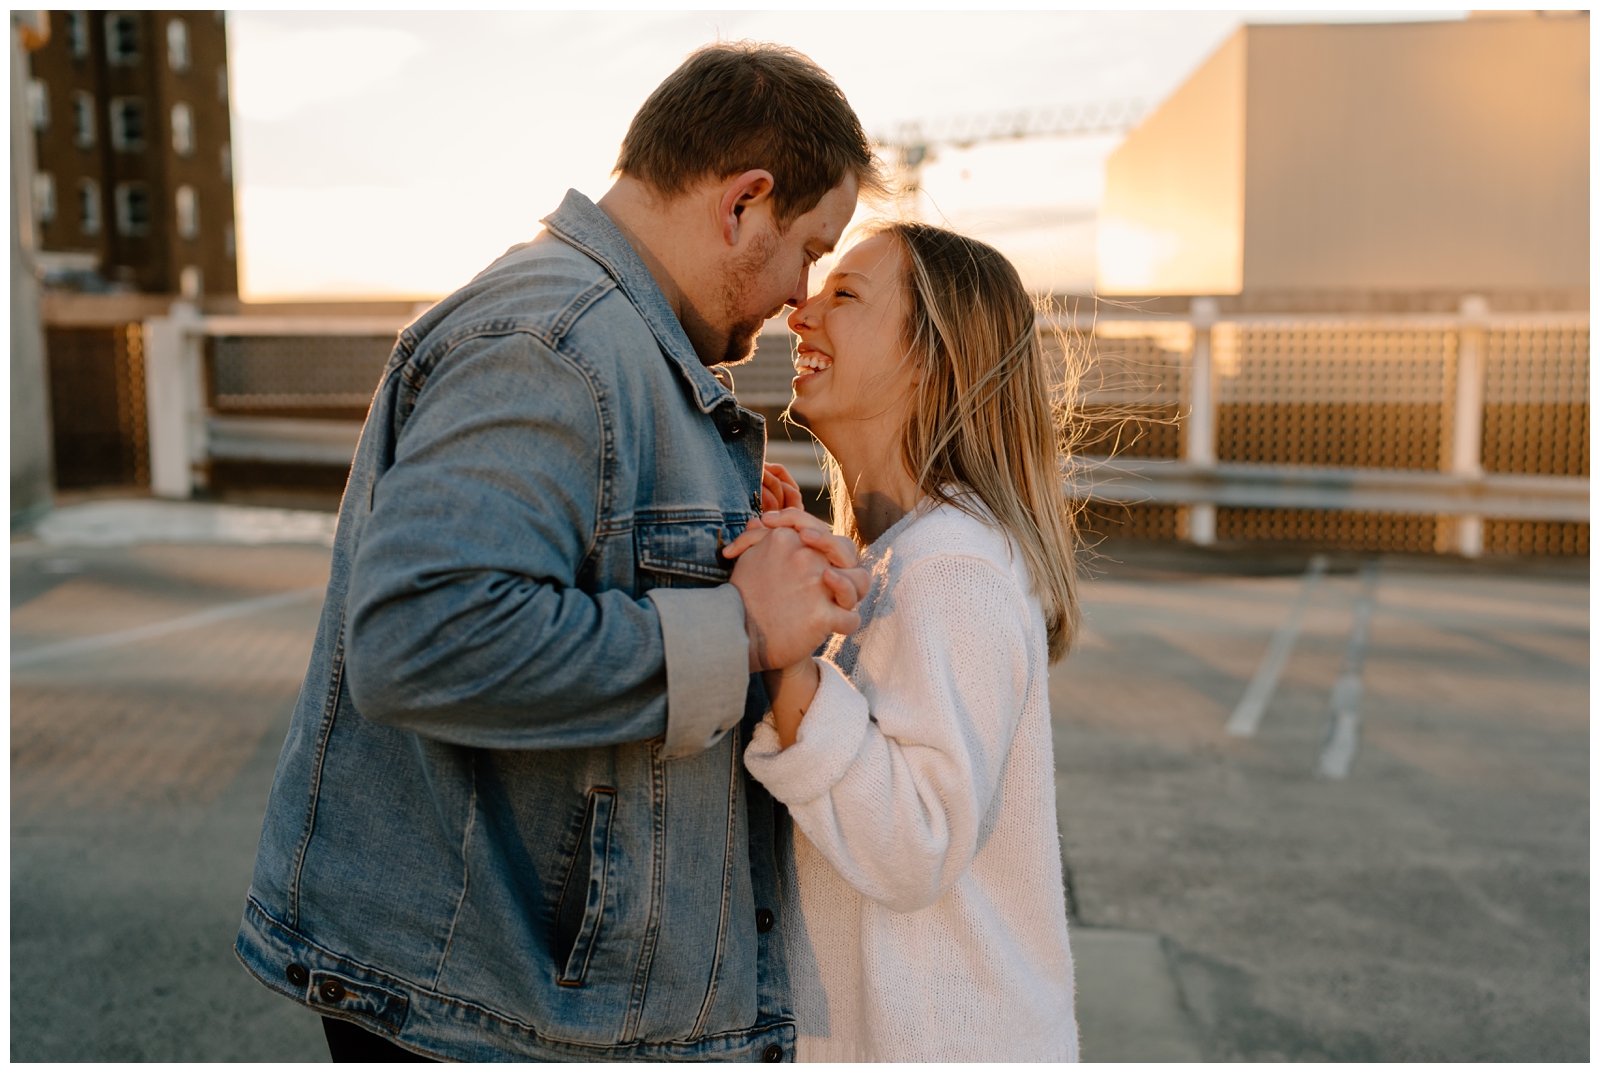 Downtown Winston-Salem, NC engagement session in the winter